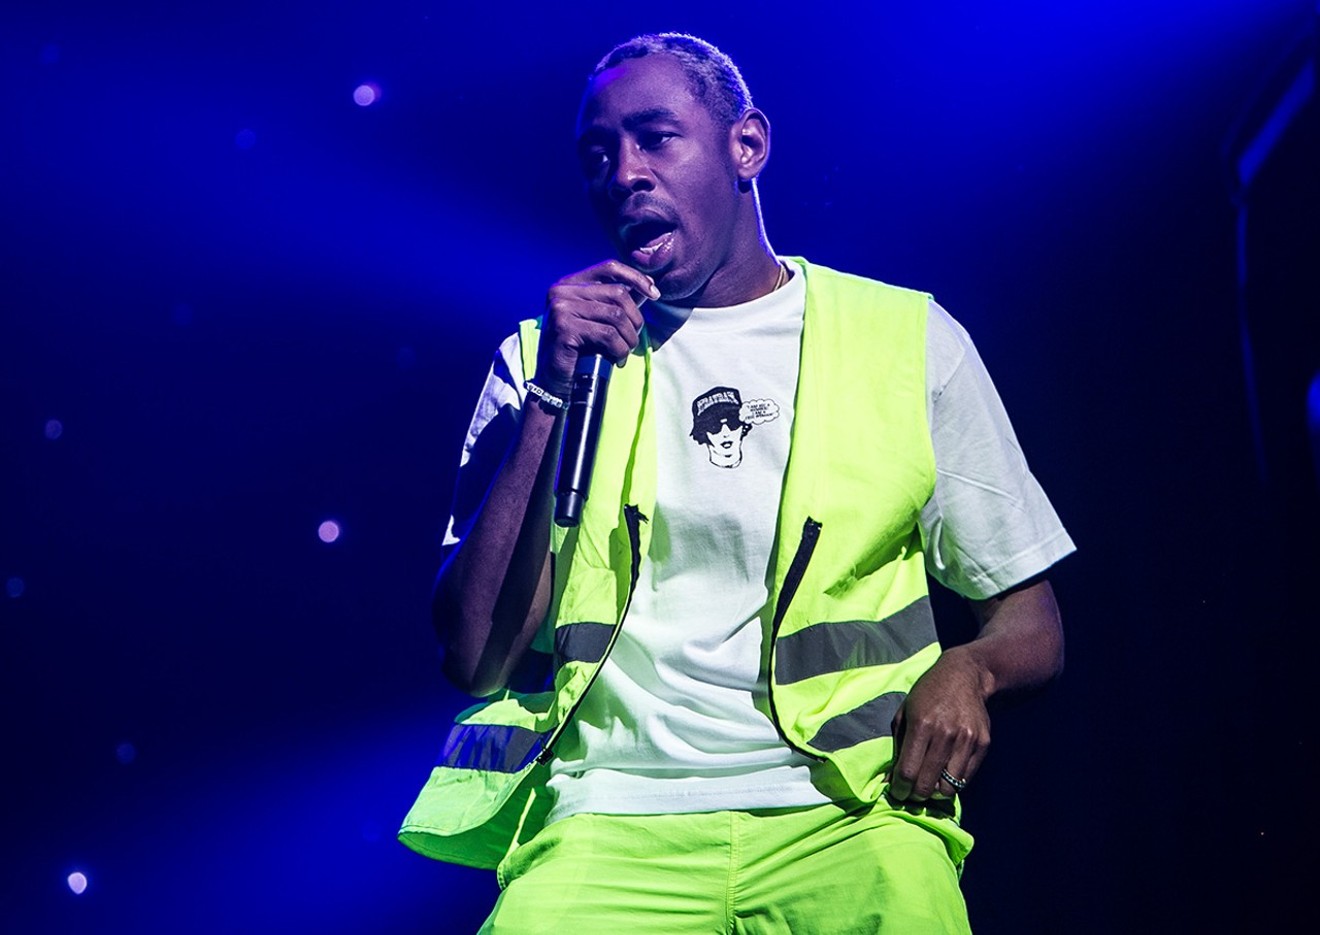 See more photos of Tyler the Creator's performance at the James L. Knight Center here.